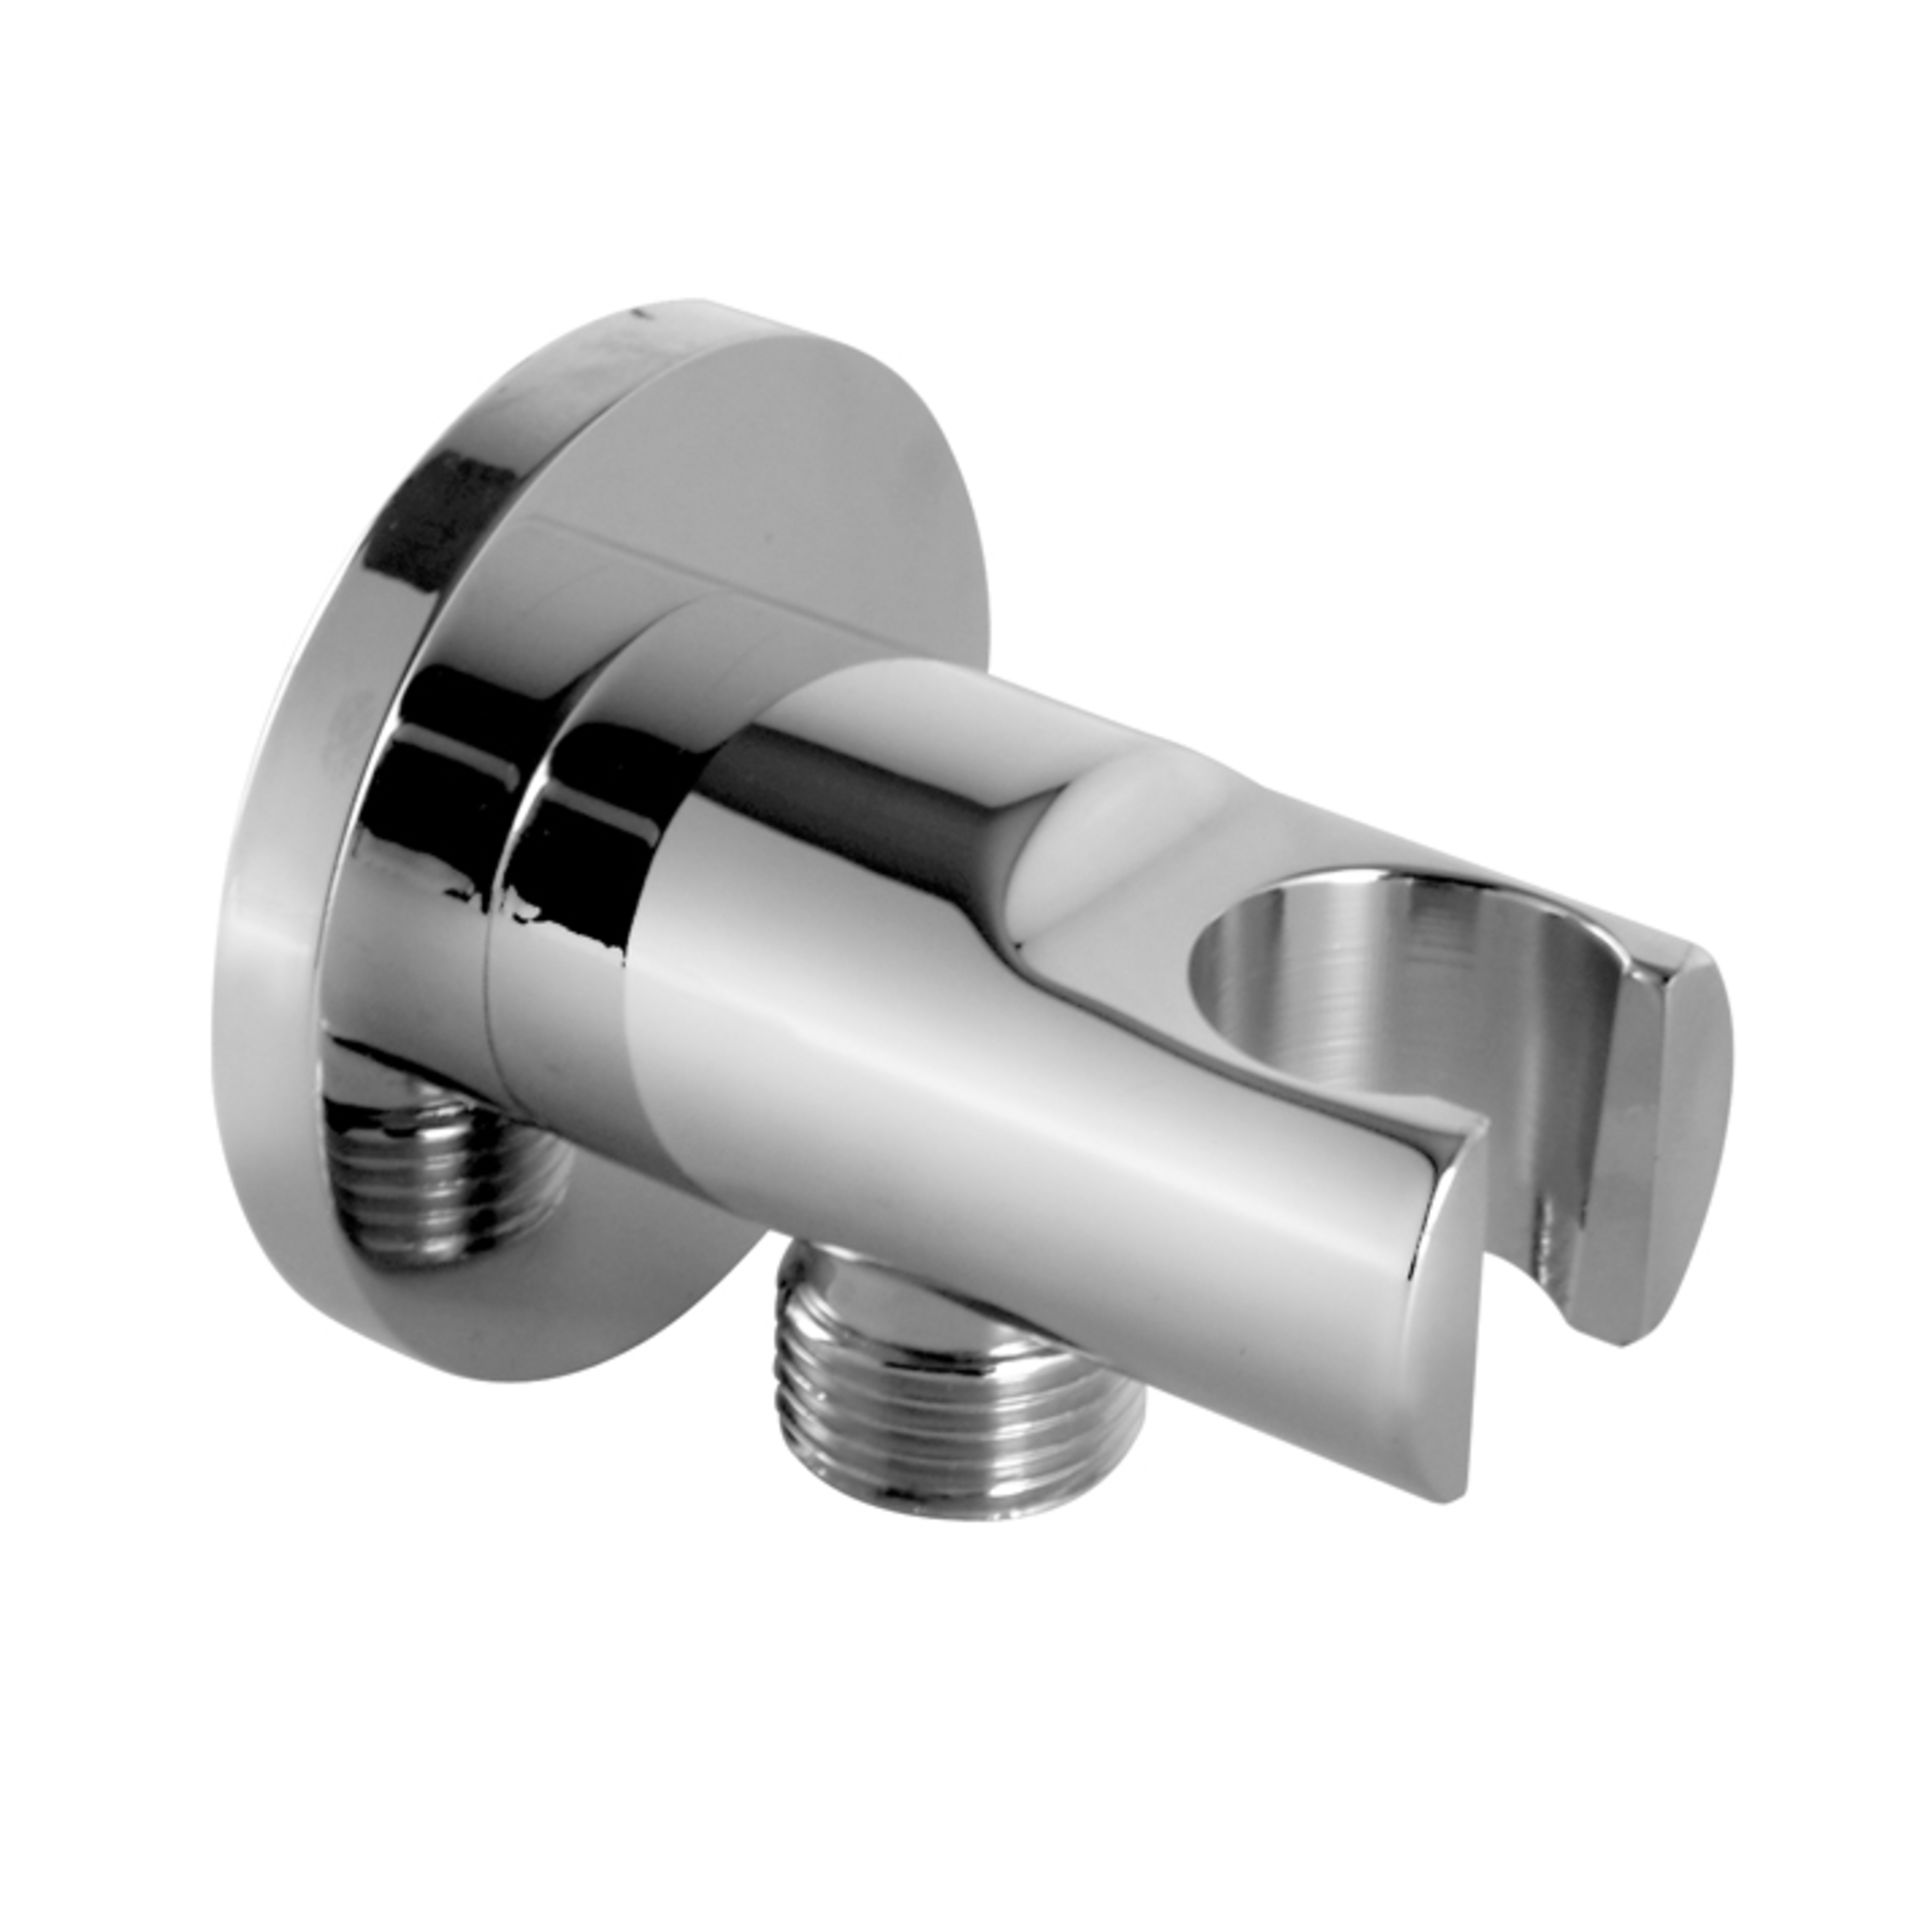 New (O197) Bathroom Taps Minimal Complements. Minimal - Wall-Mounted Hand Shower Holder With Wa...